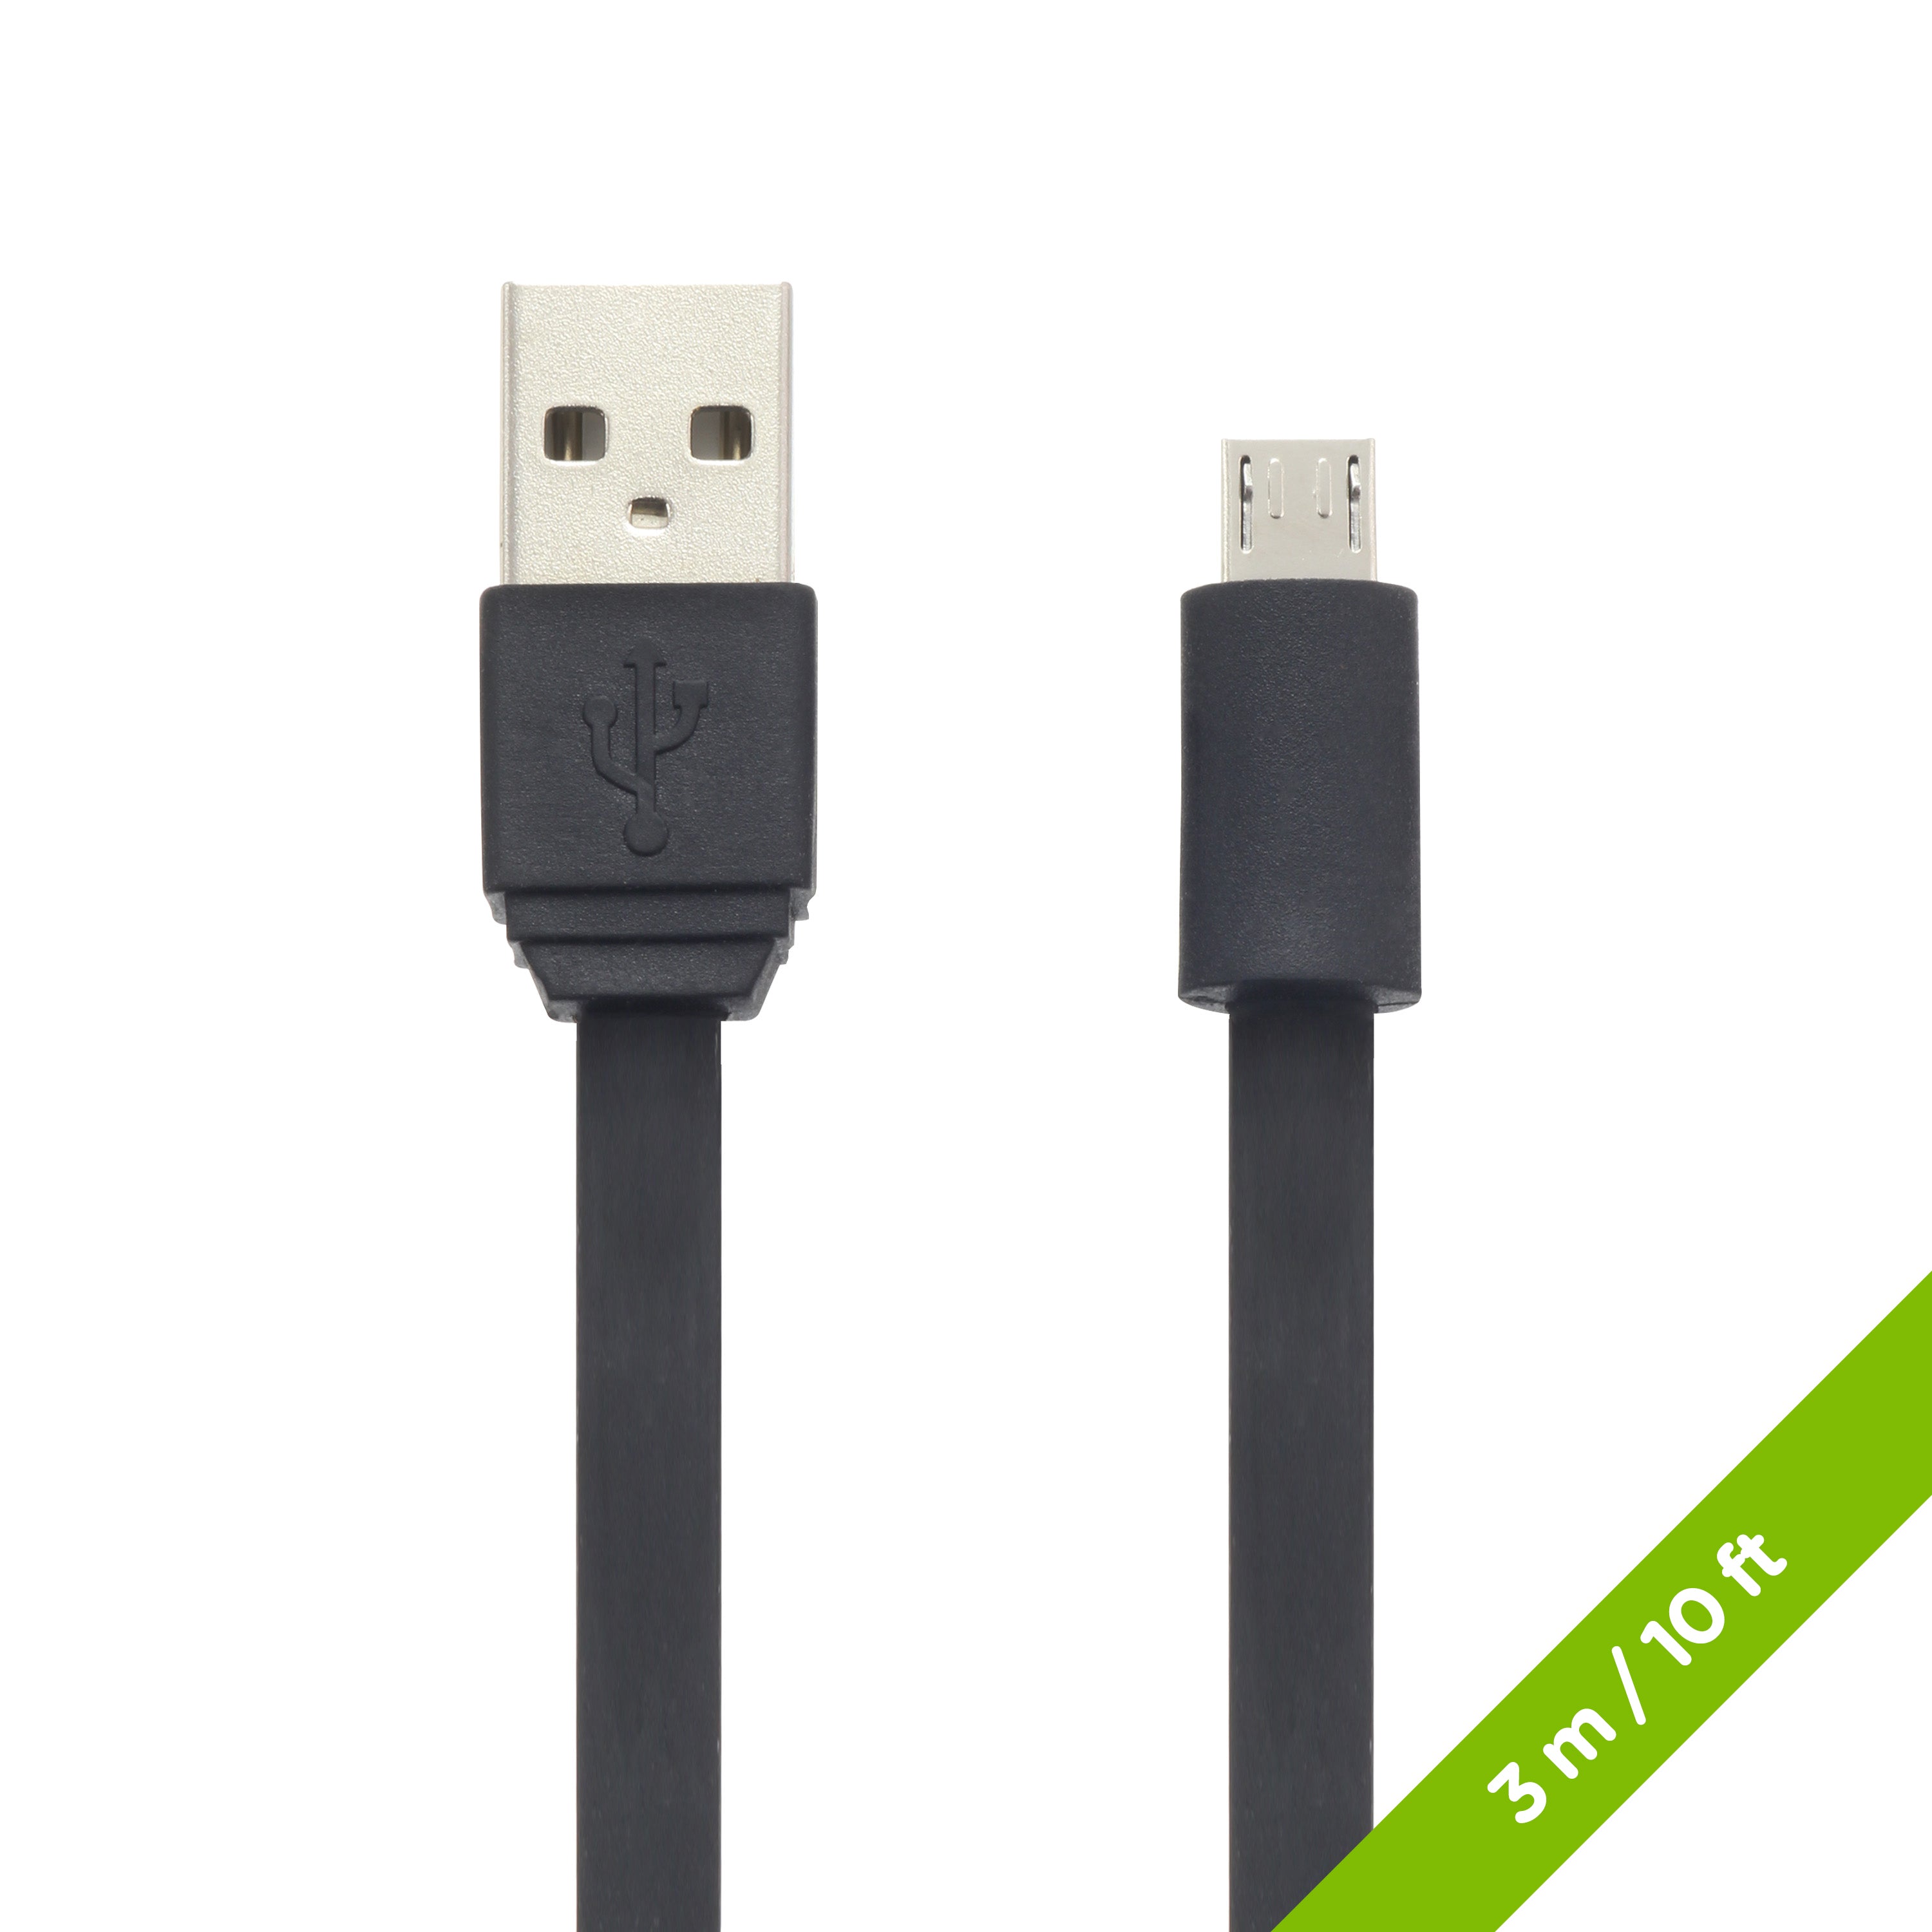 MicroUSB to USB SynCharge Cable